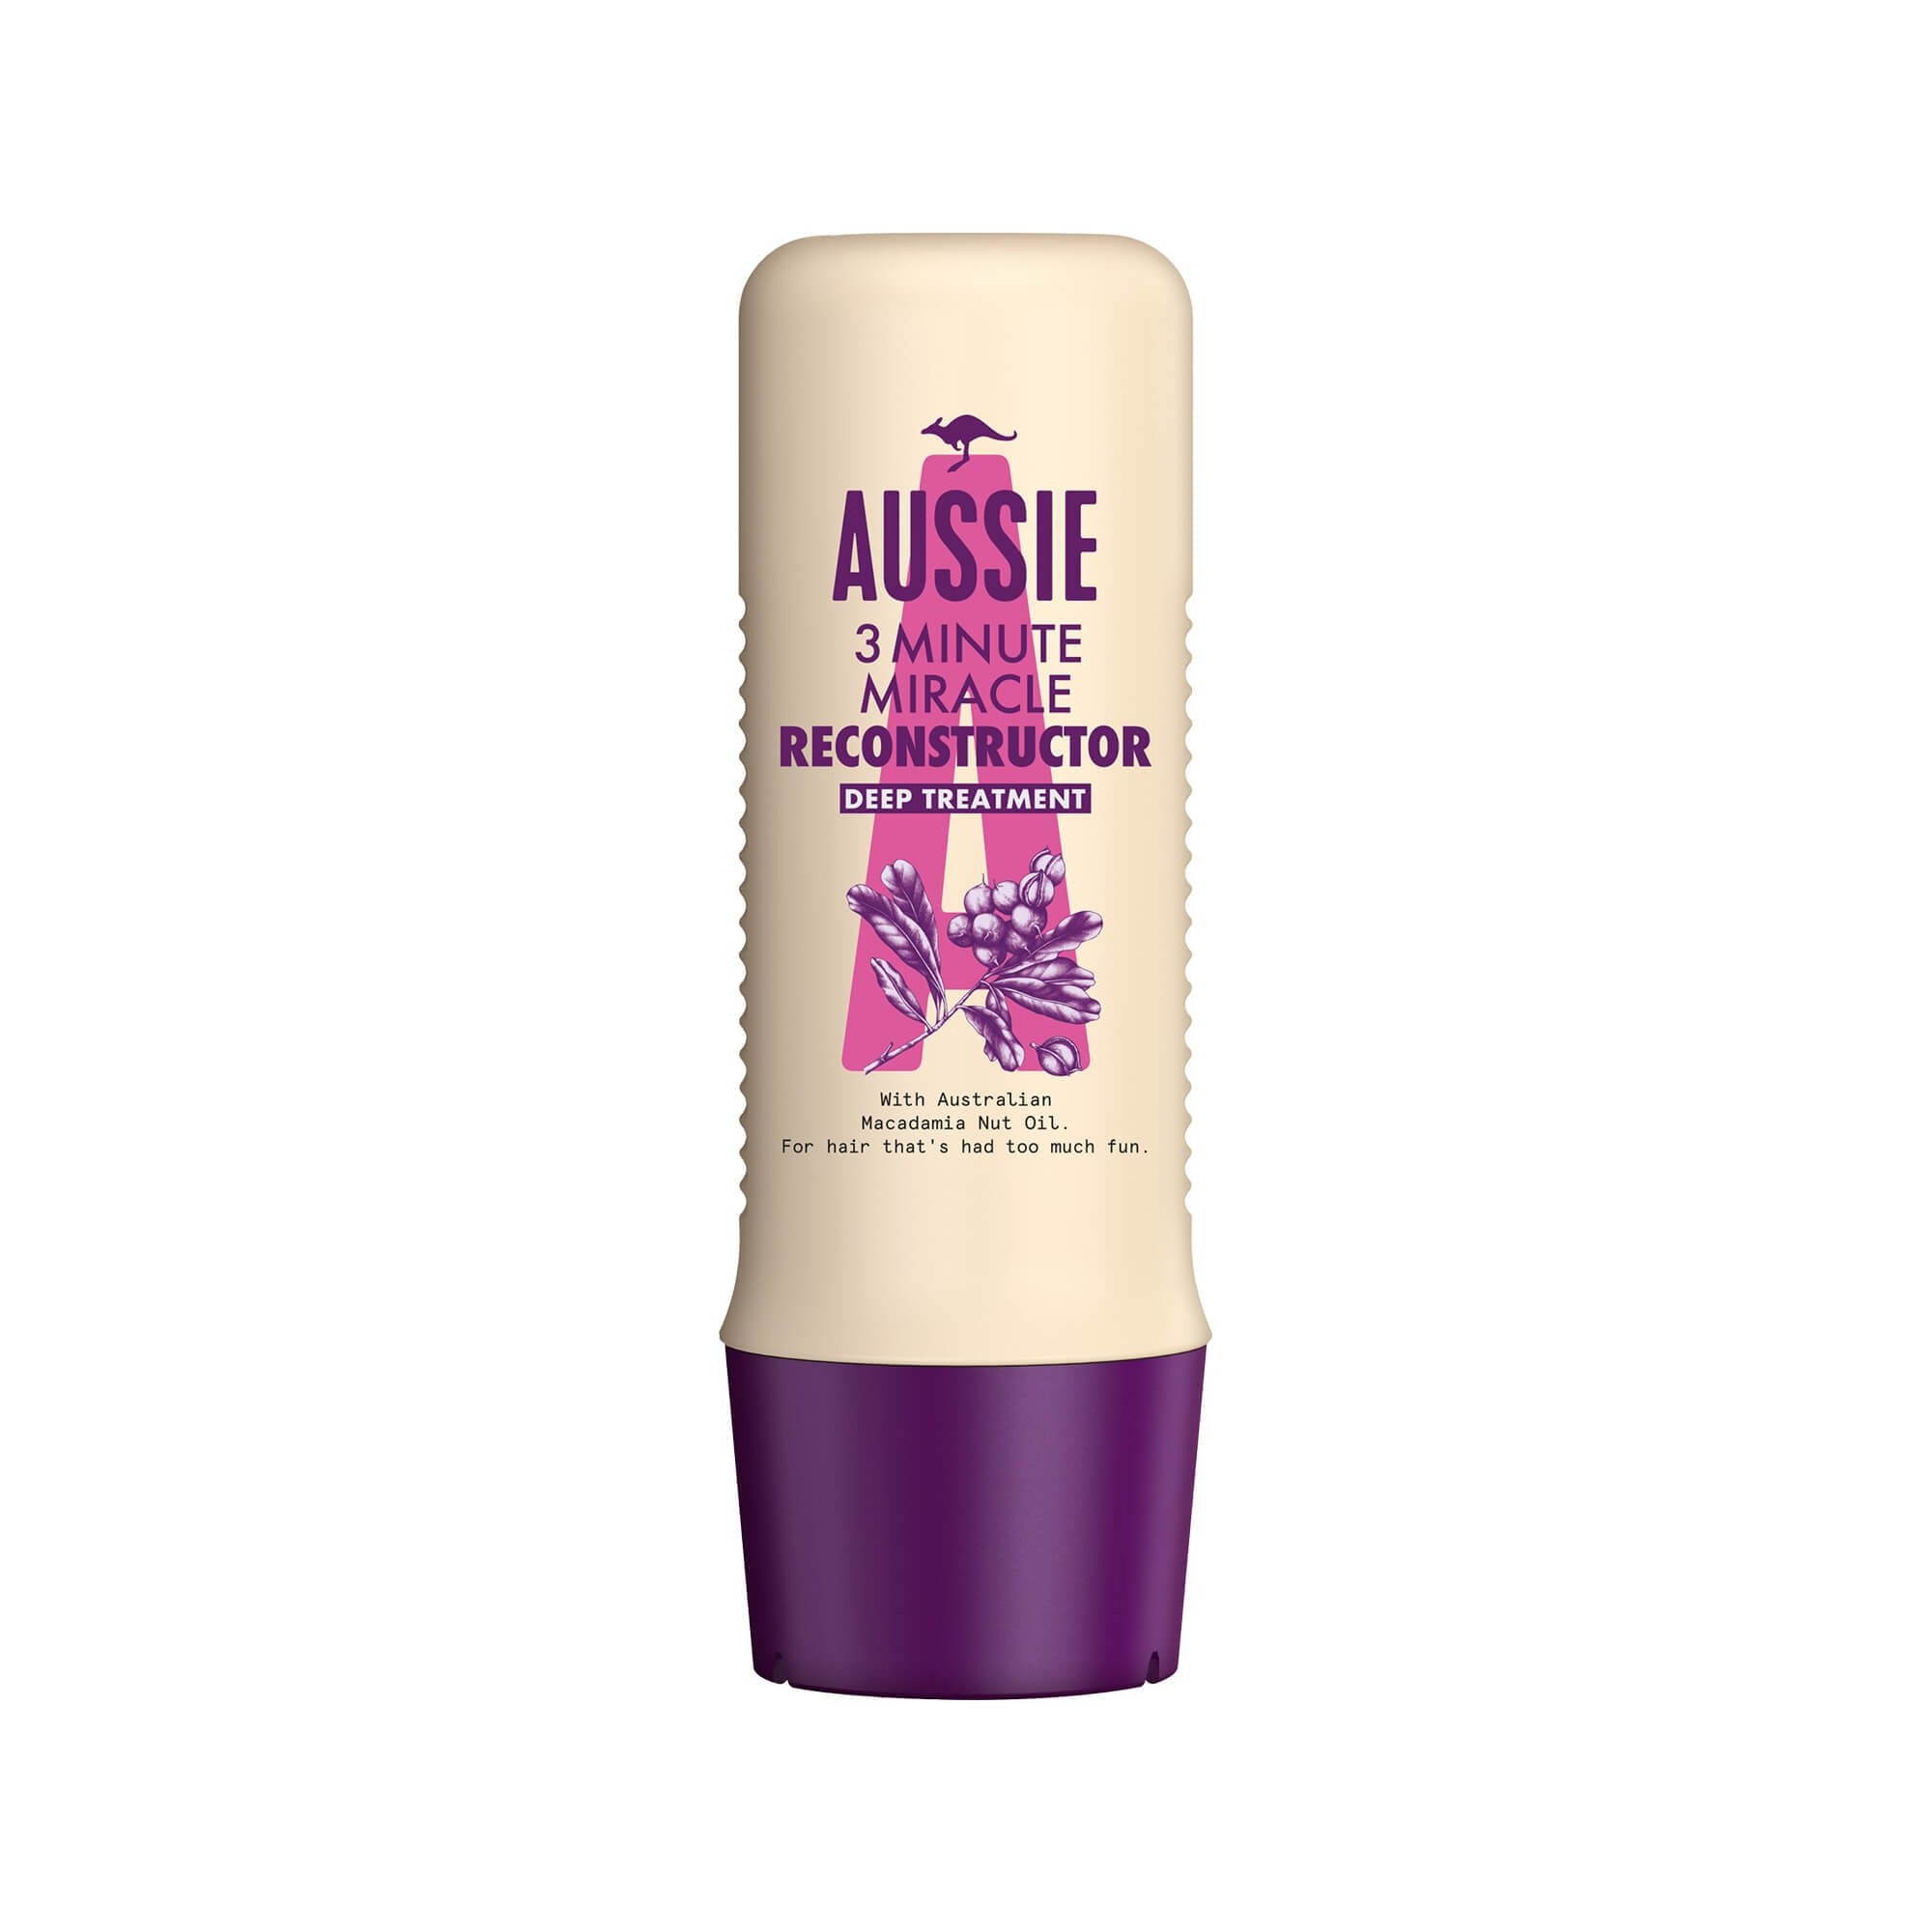 Aussie 3 Minute Miracle Reconstructor Conditioner 250ml 